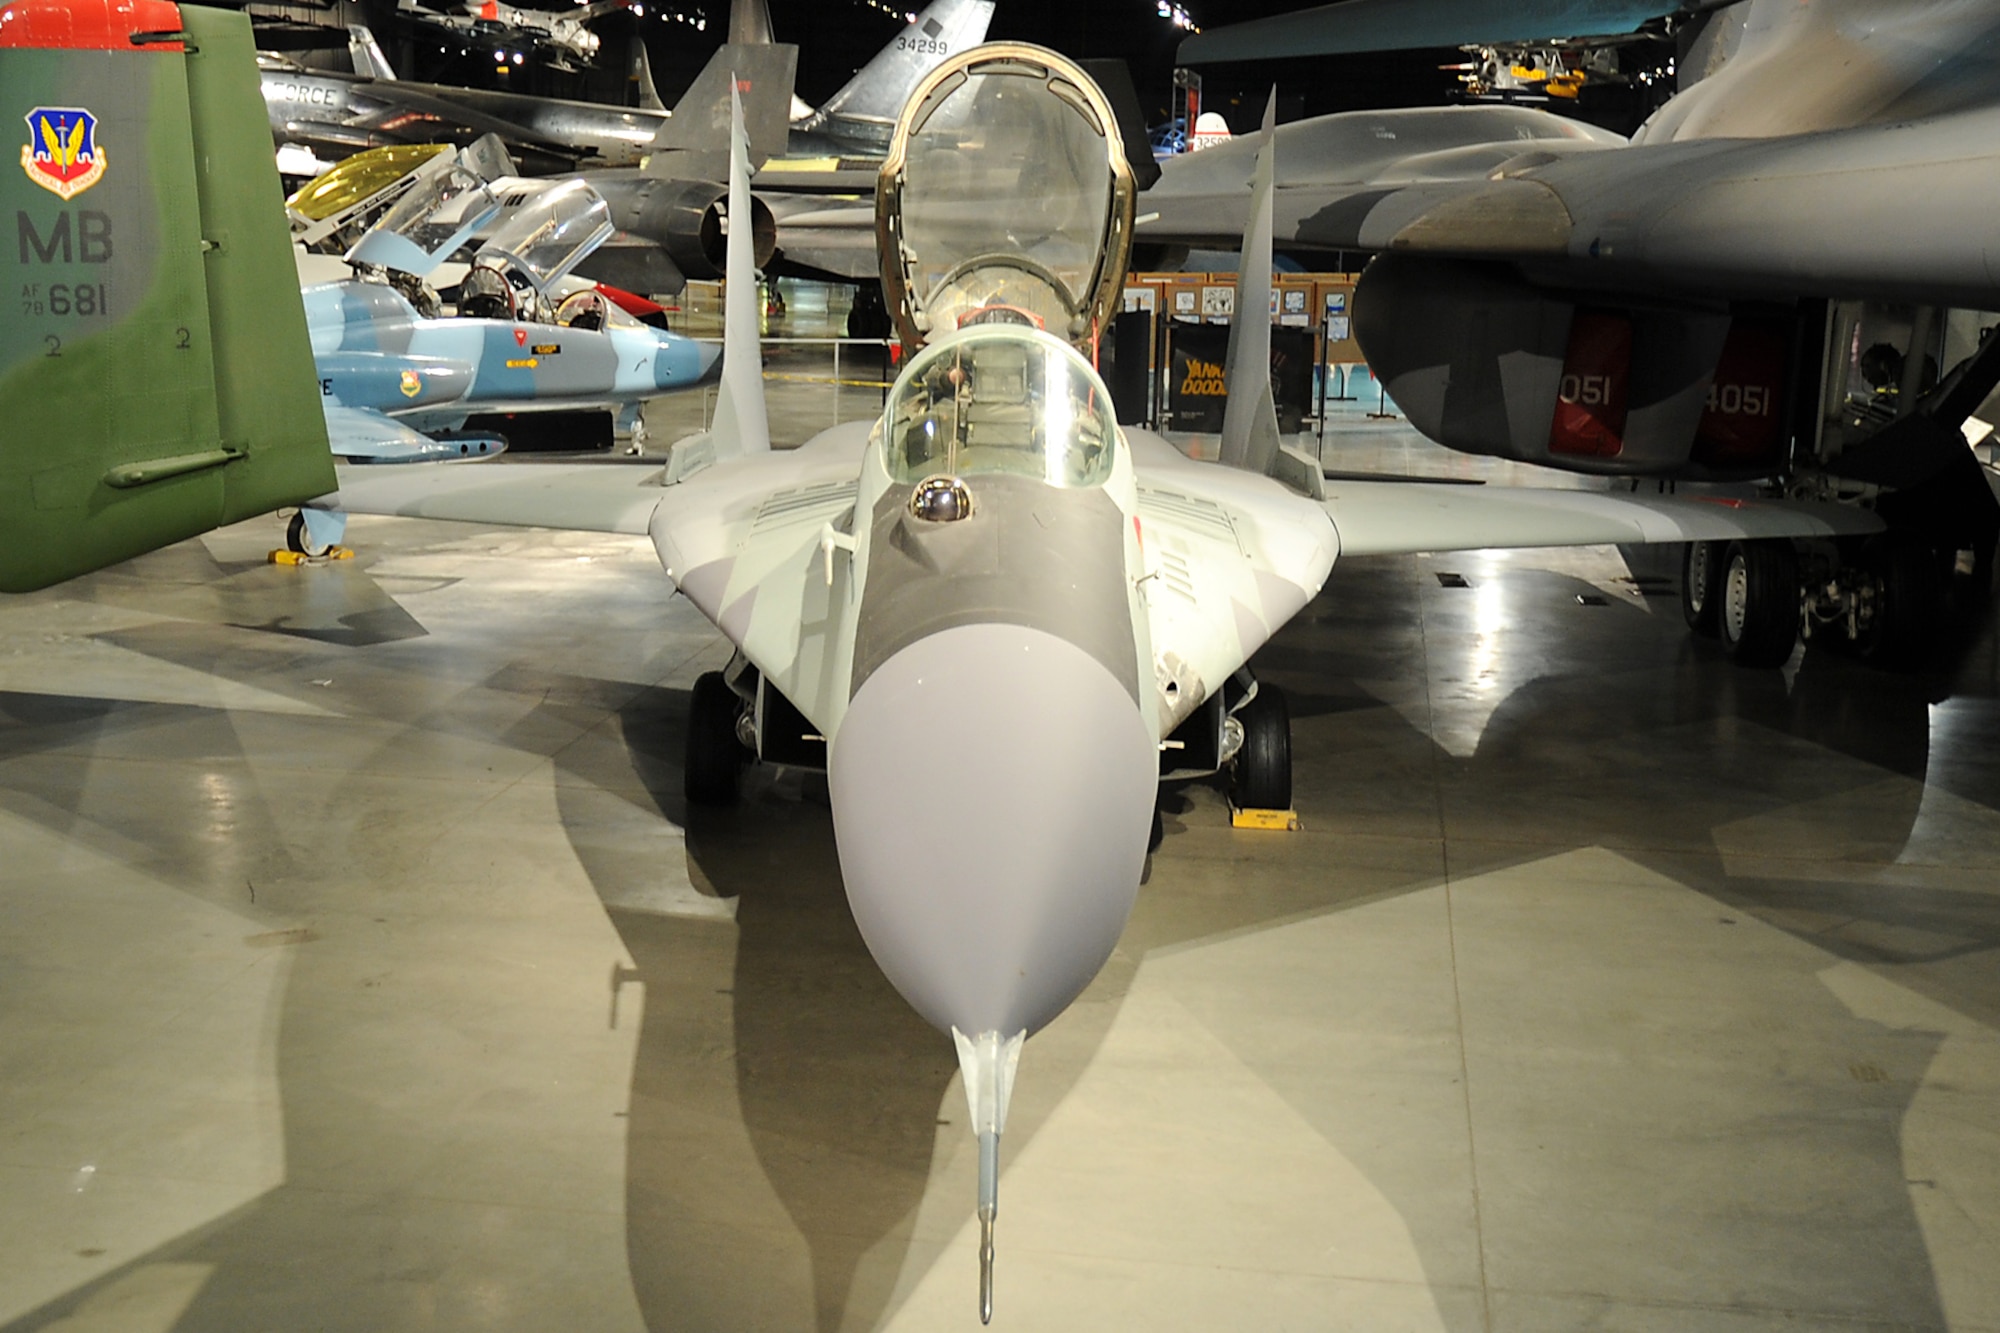 DAYTON, Ohio -- Mikoyan-Gurevich MiG-29A in the Cold War Gallery at the National Museum of the United States Air Force. (U.S. Air Force photo by Ken LaRock)
